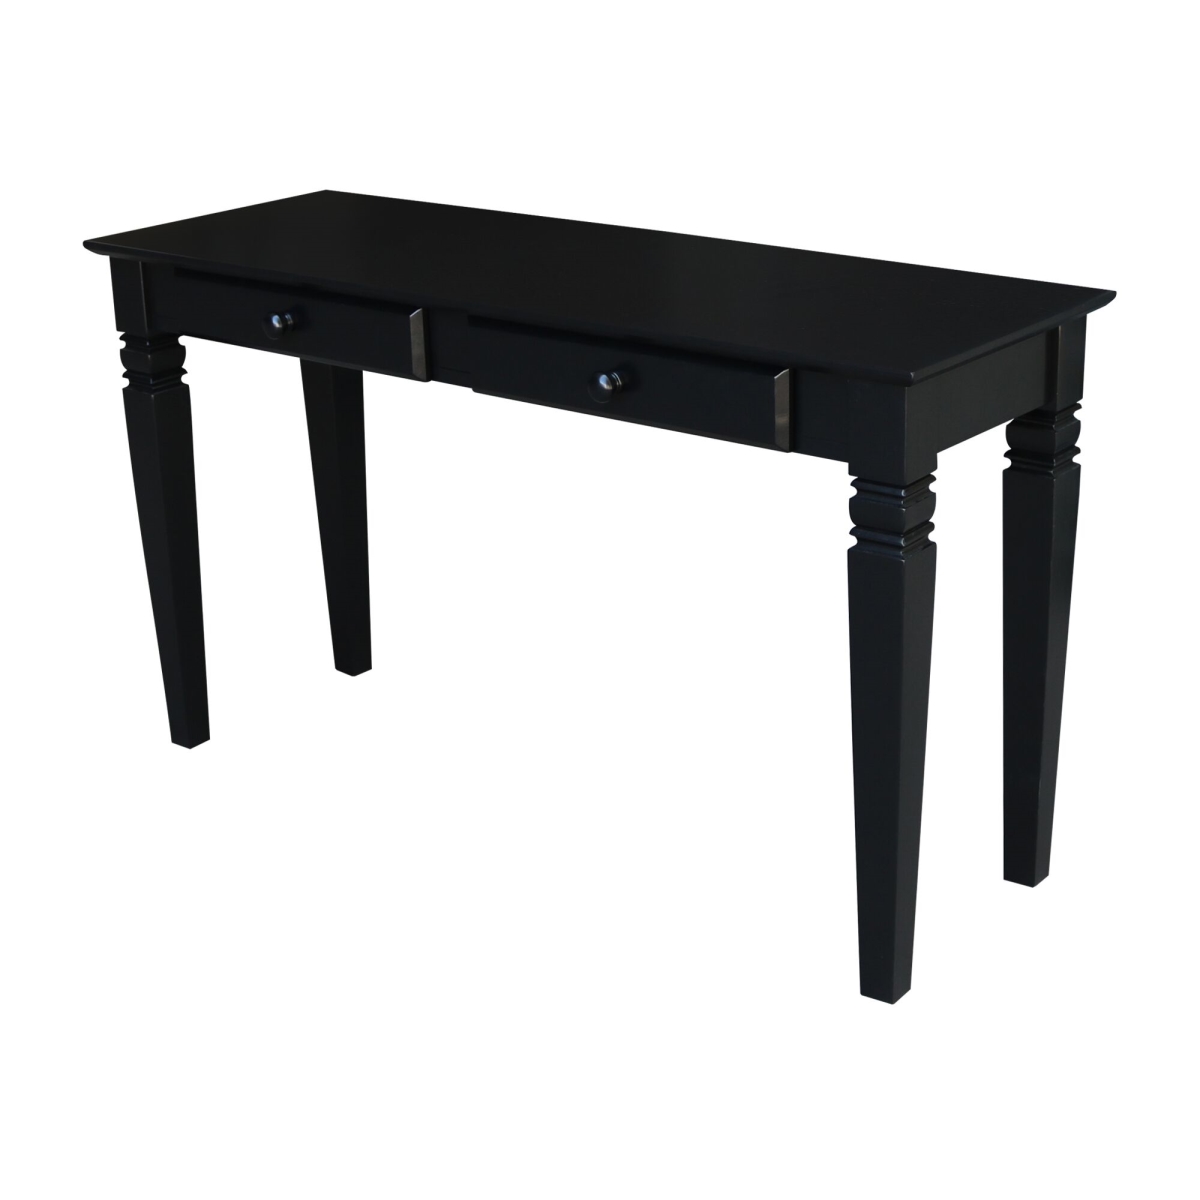 Ot46-60s2 Java Console Table With 2 Drawers, Black